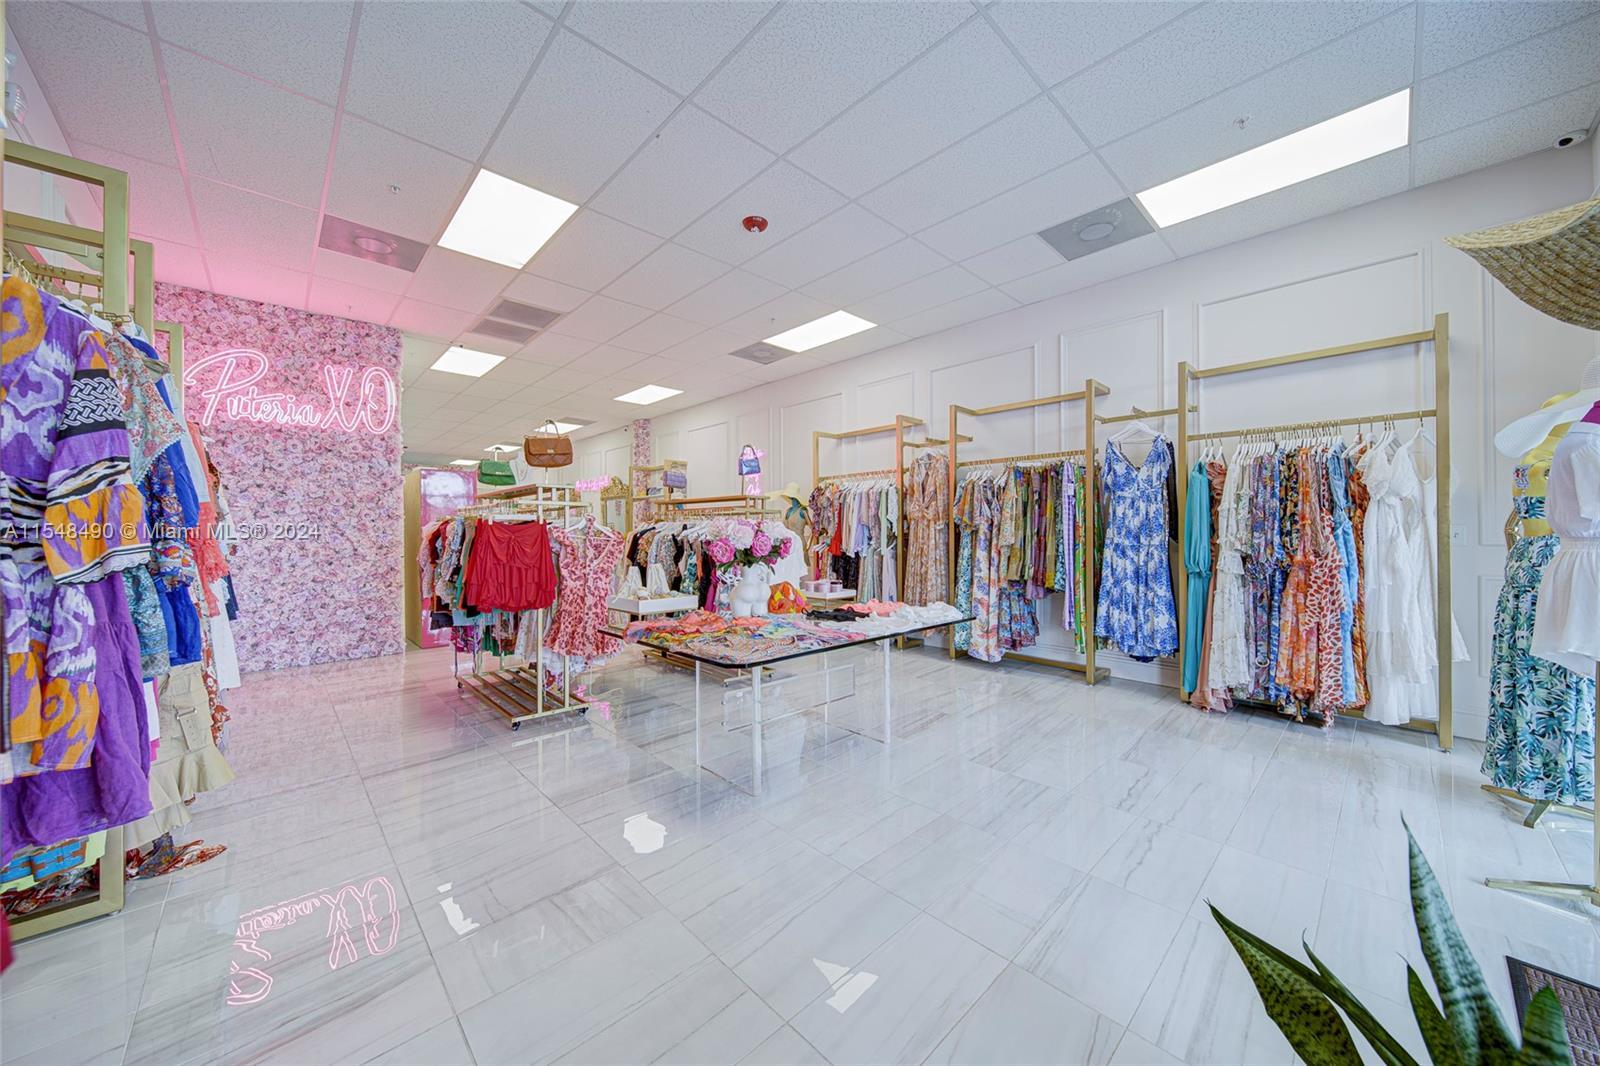 Photo of Clothing Retail Store For Sale In Miami in Miami, FL